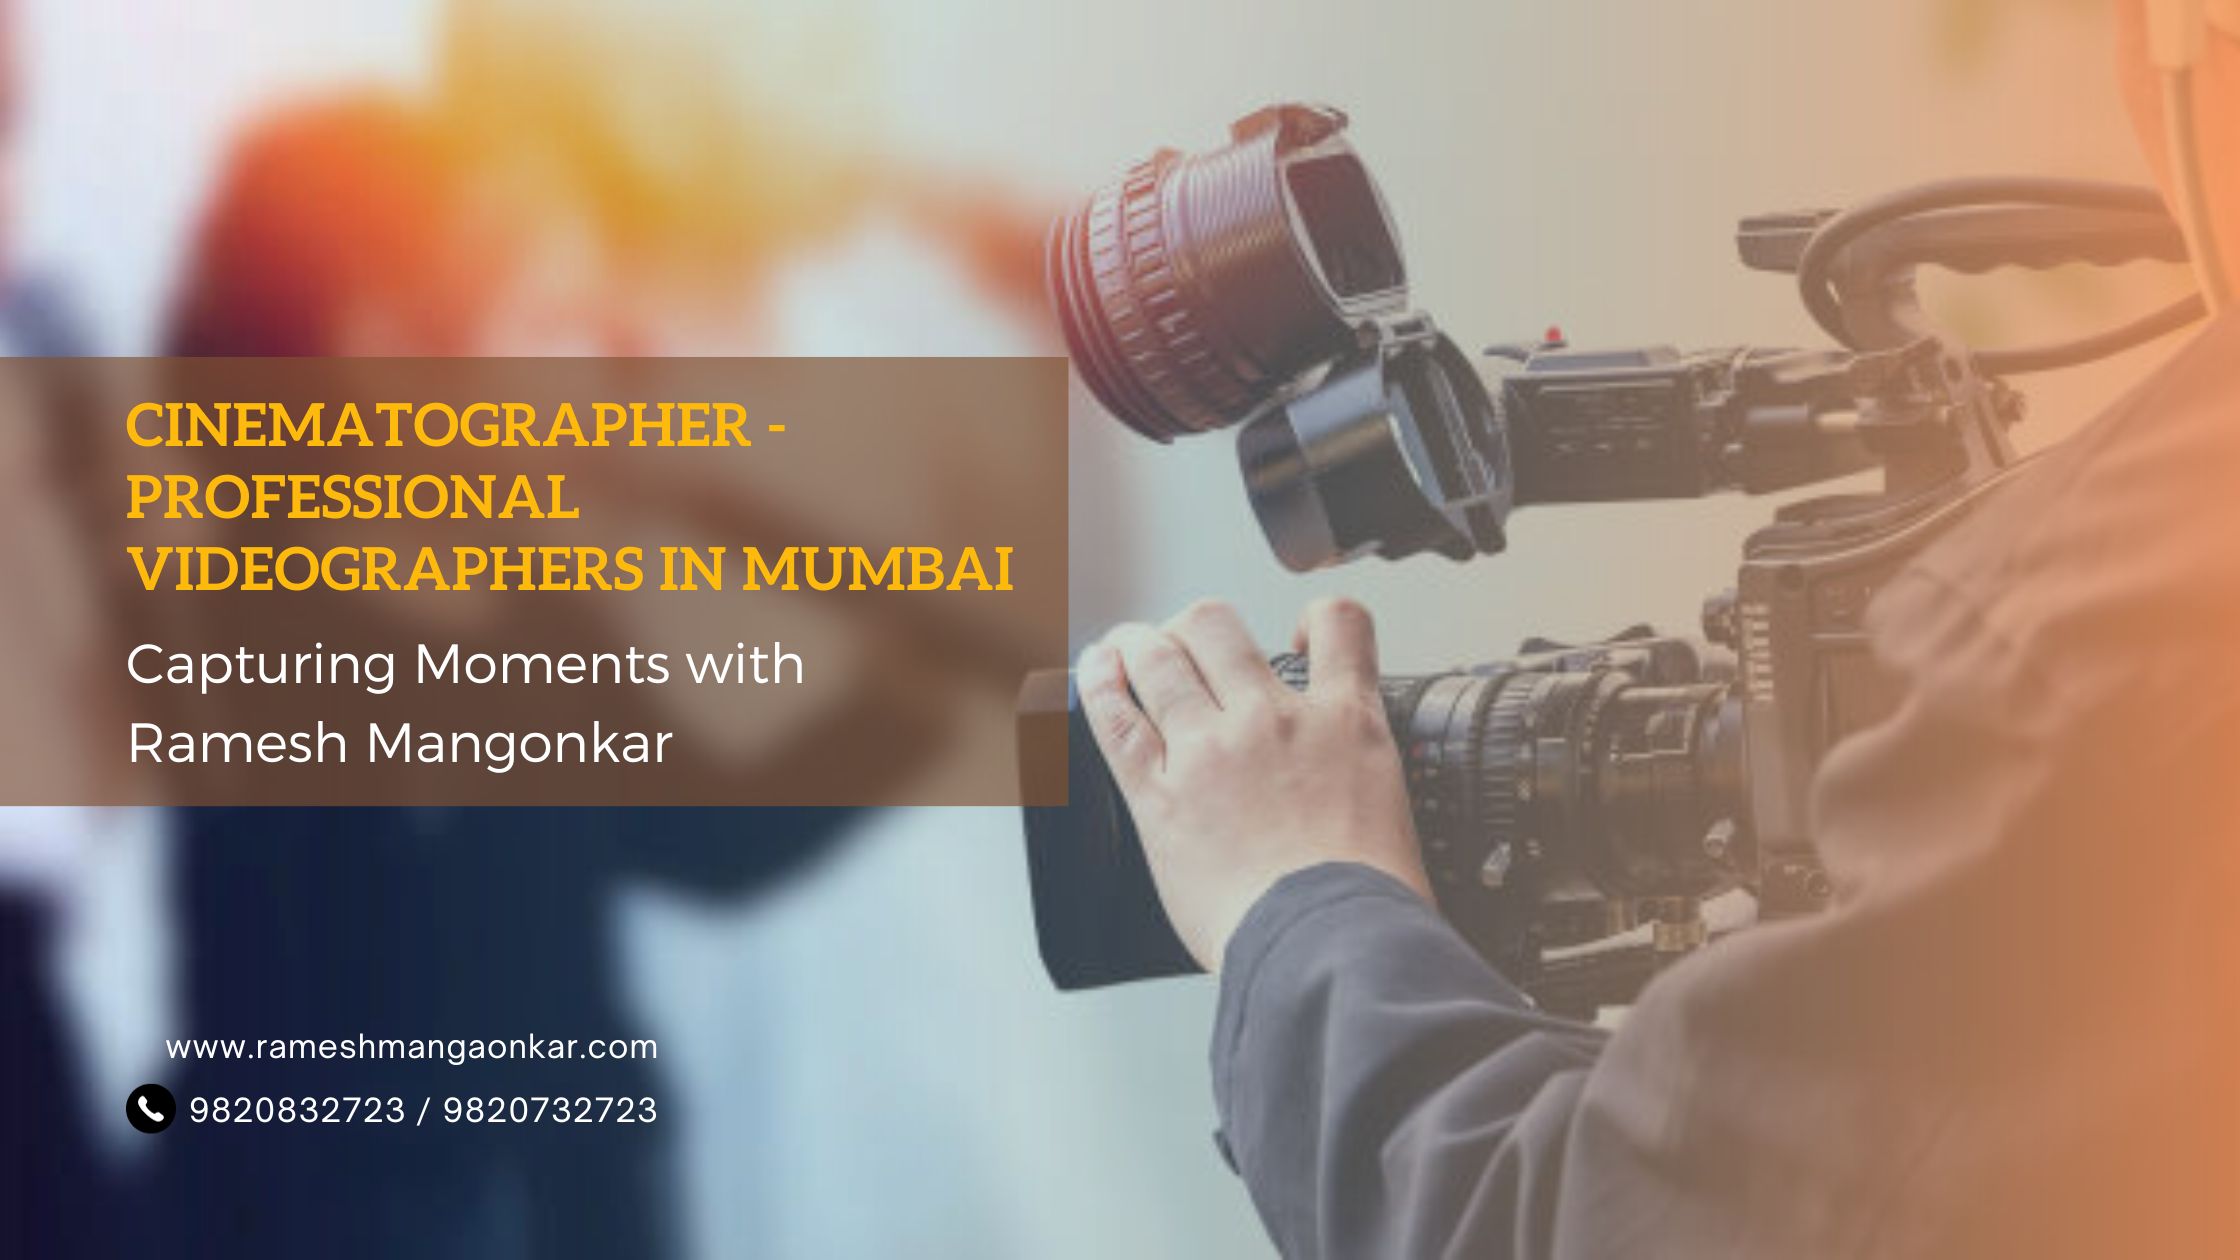 You are currently viewing Cinematographer – Professional Videographers in Mumbai: Capturing Moments with Ramesh Mangonkar